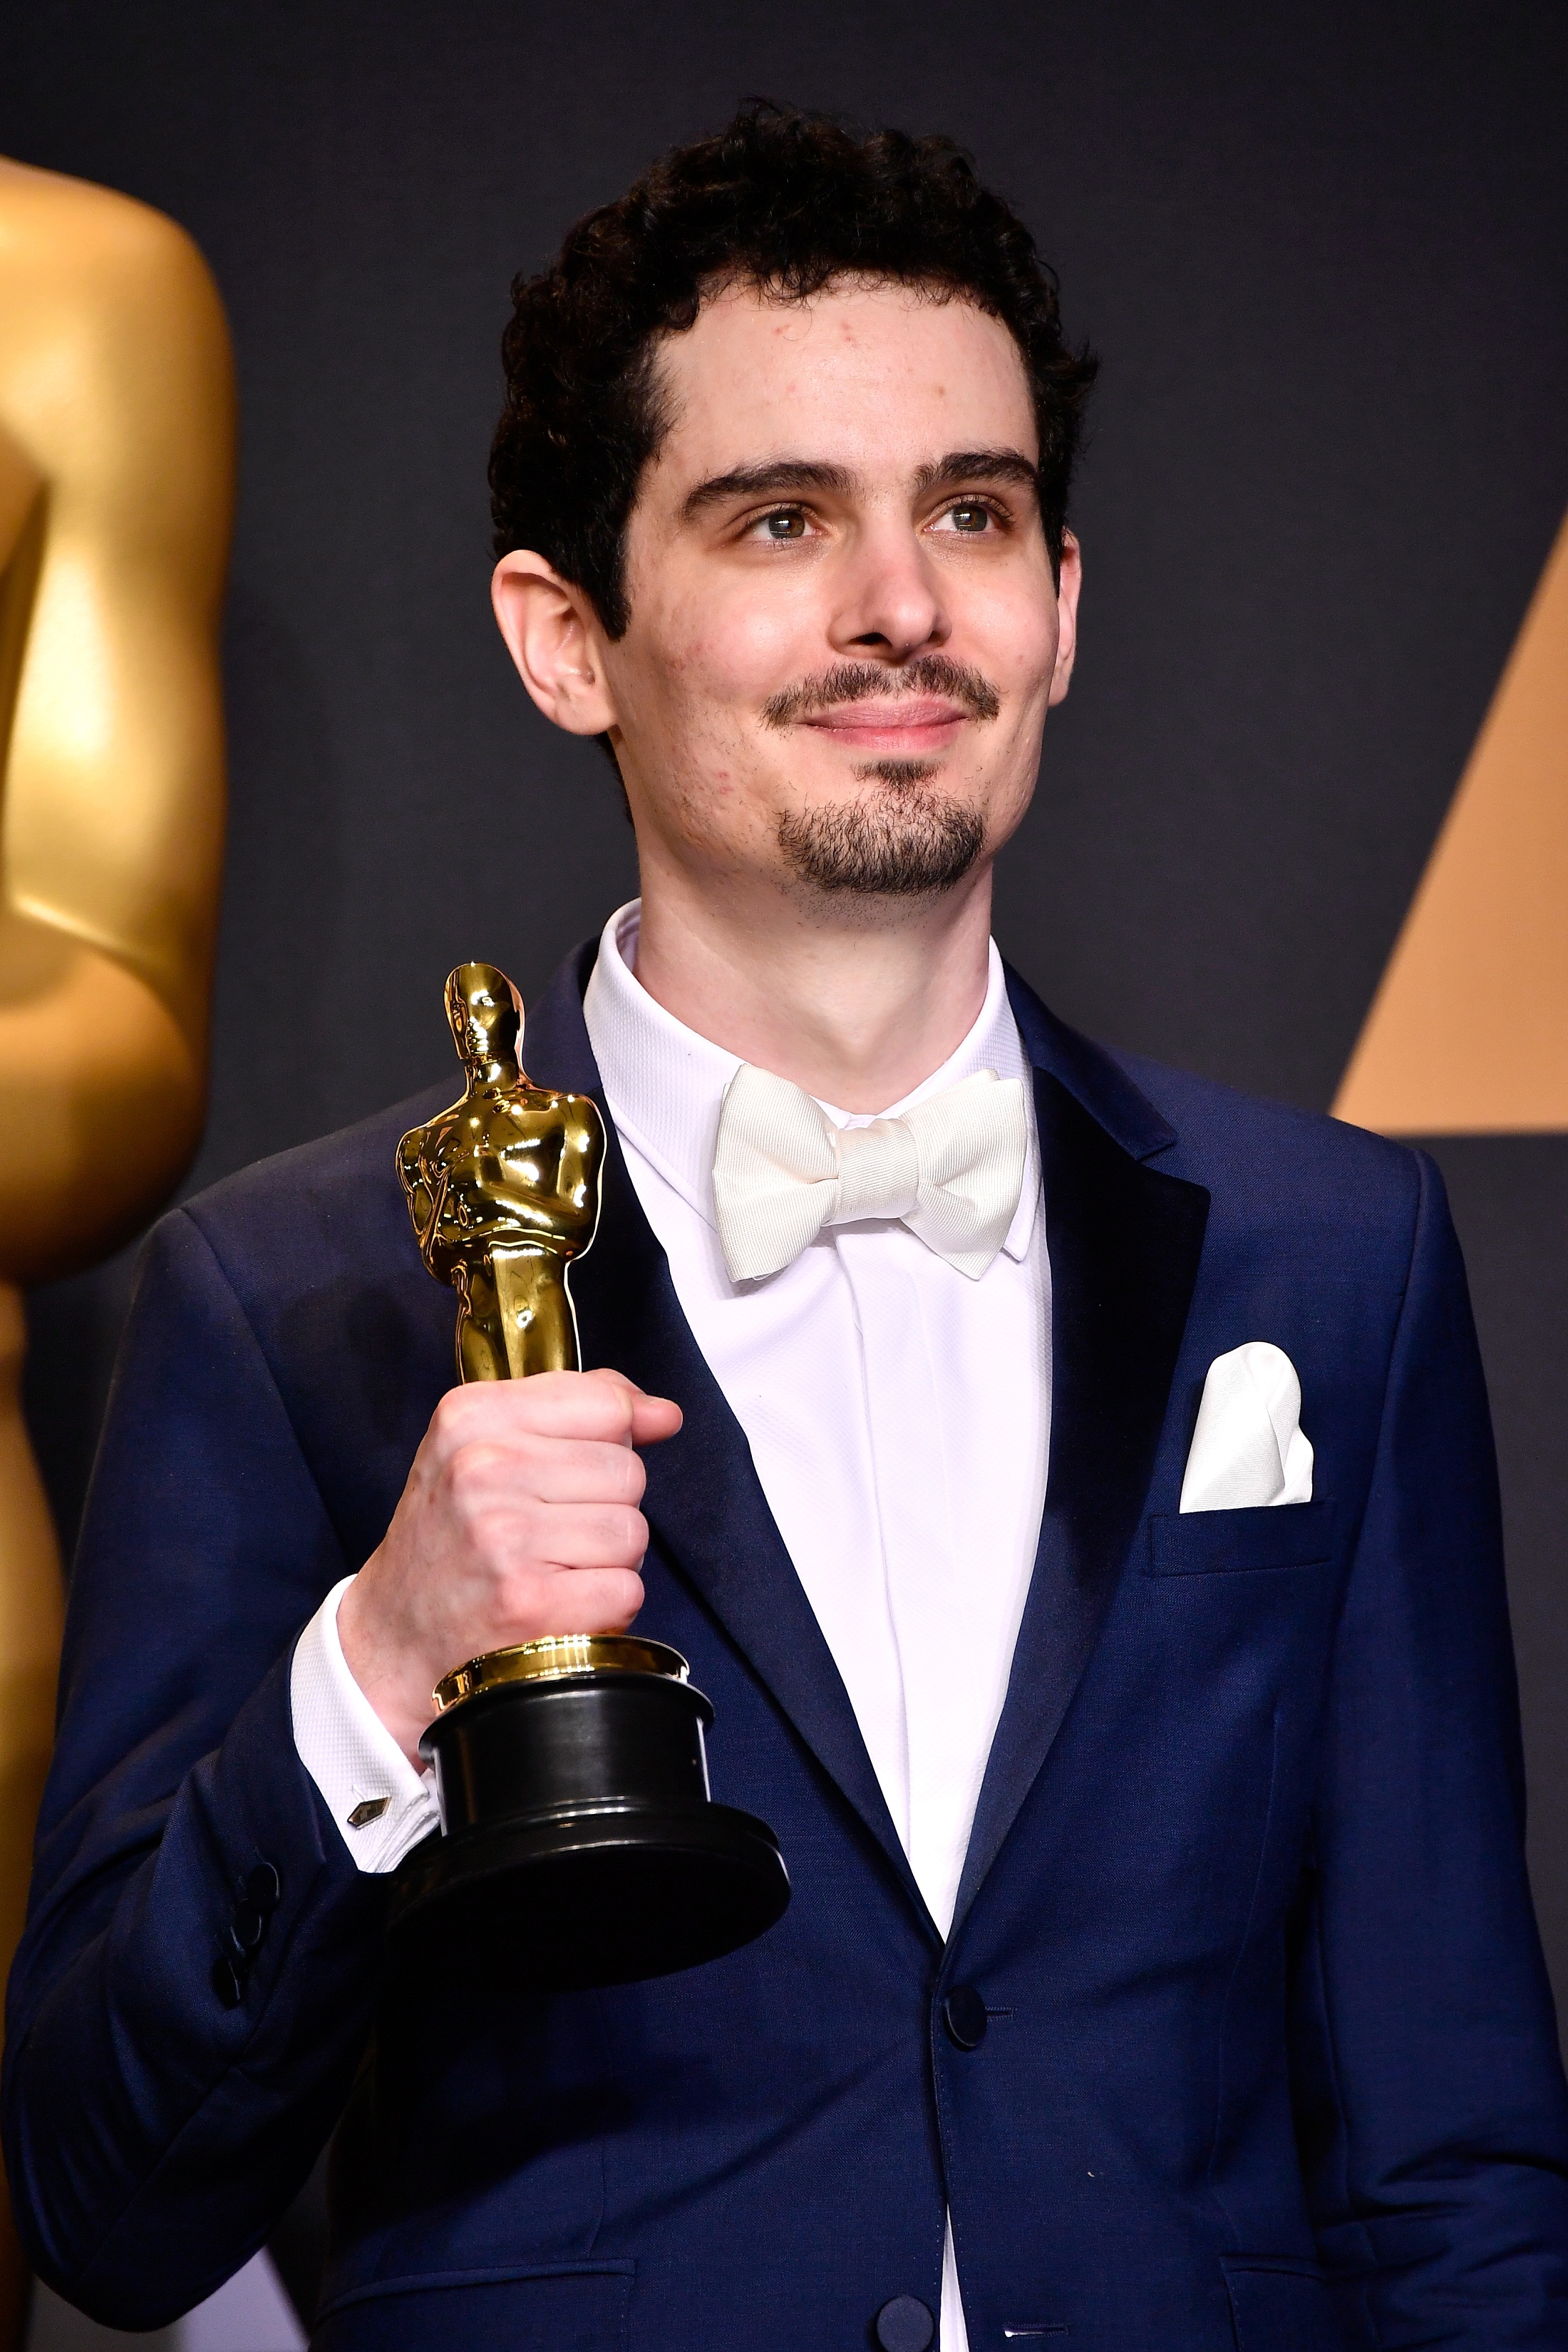 HOLLYWOOD, CA - FEBRUARY 26: Director Damien Chazelle, winner of Best Director for 'La La Land' poses in the press room during the 89th Annual Academy Awards at Hollywood & Highland Center on February 26, 2017 in Hollywood, California. Frazer Harrison/Getty Images/AFP